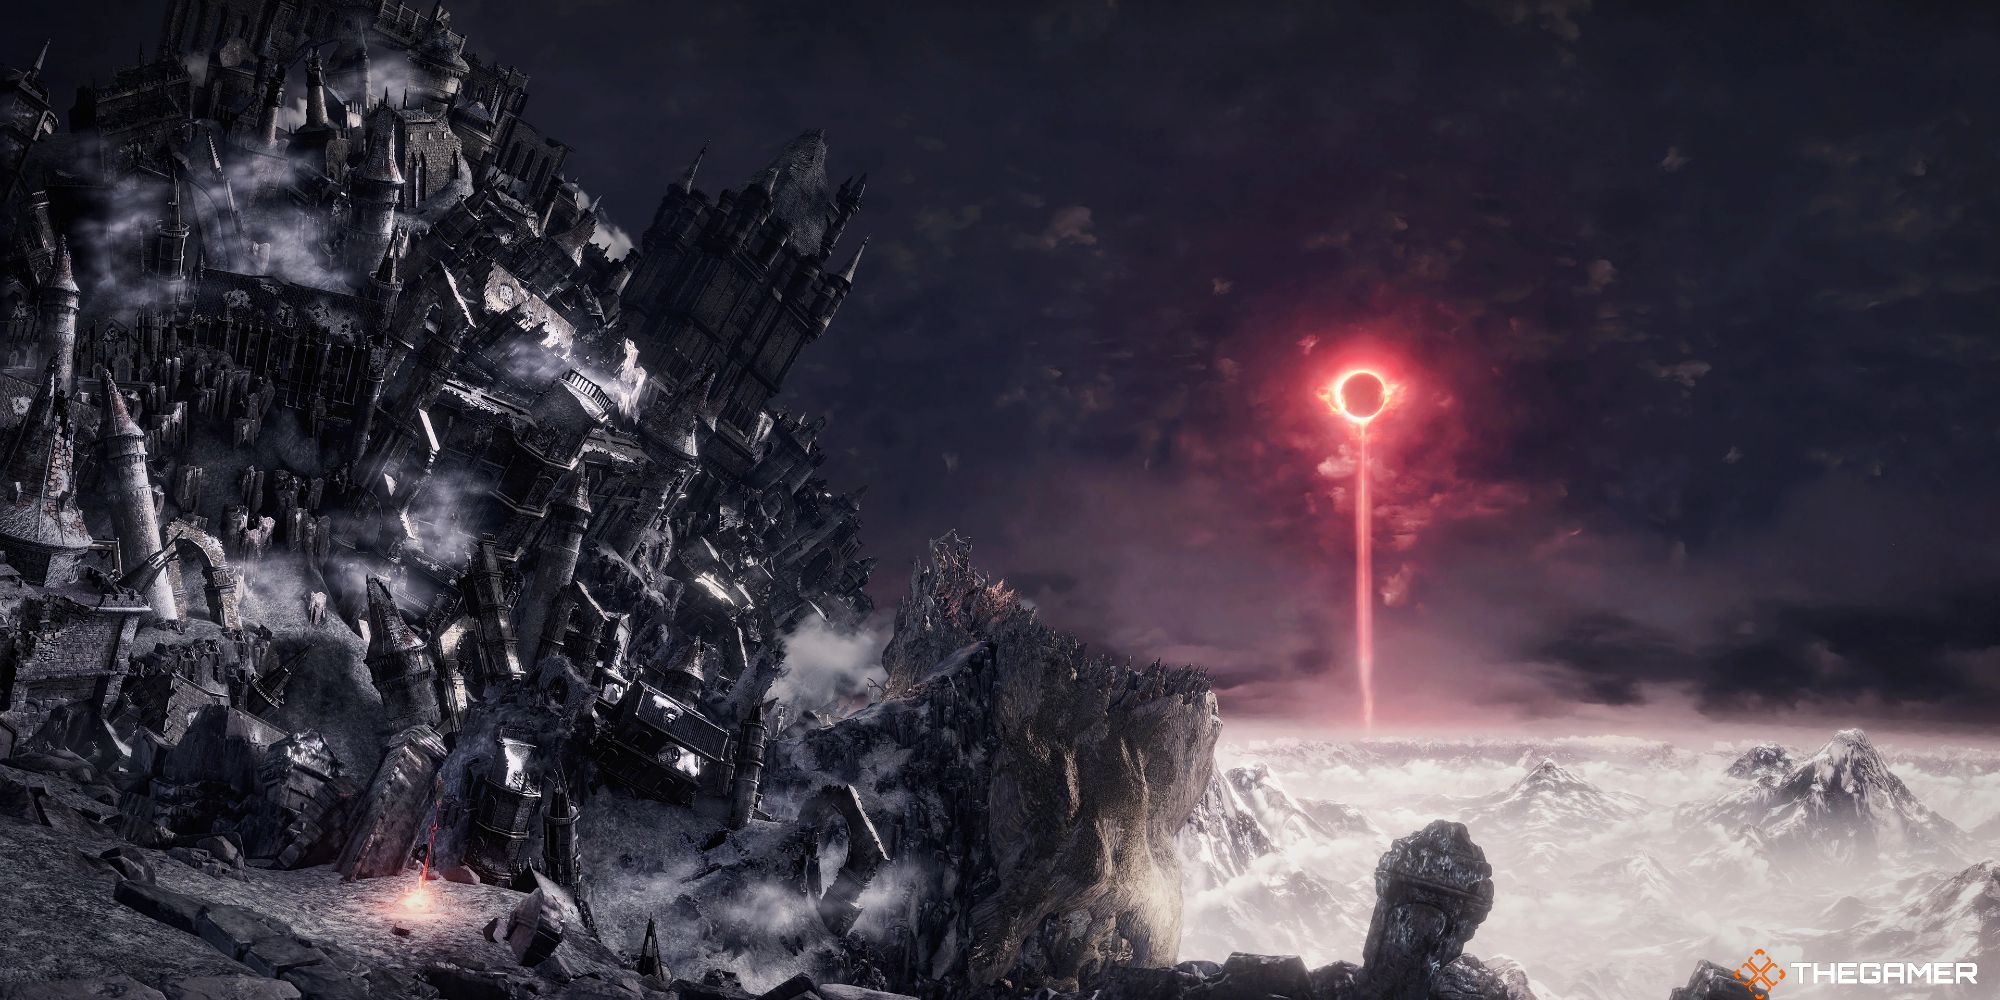 Dark Souls 10 Locations We'd Love To Experience All Over Again The Kiln of the First Flame